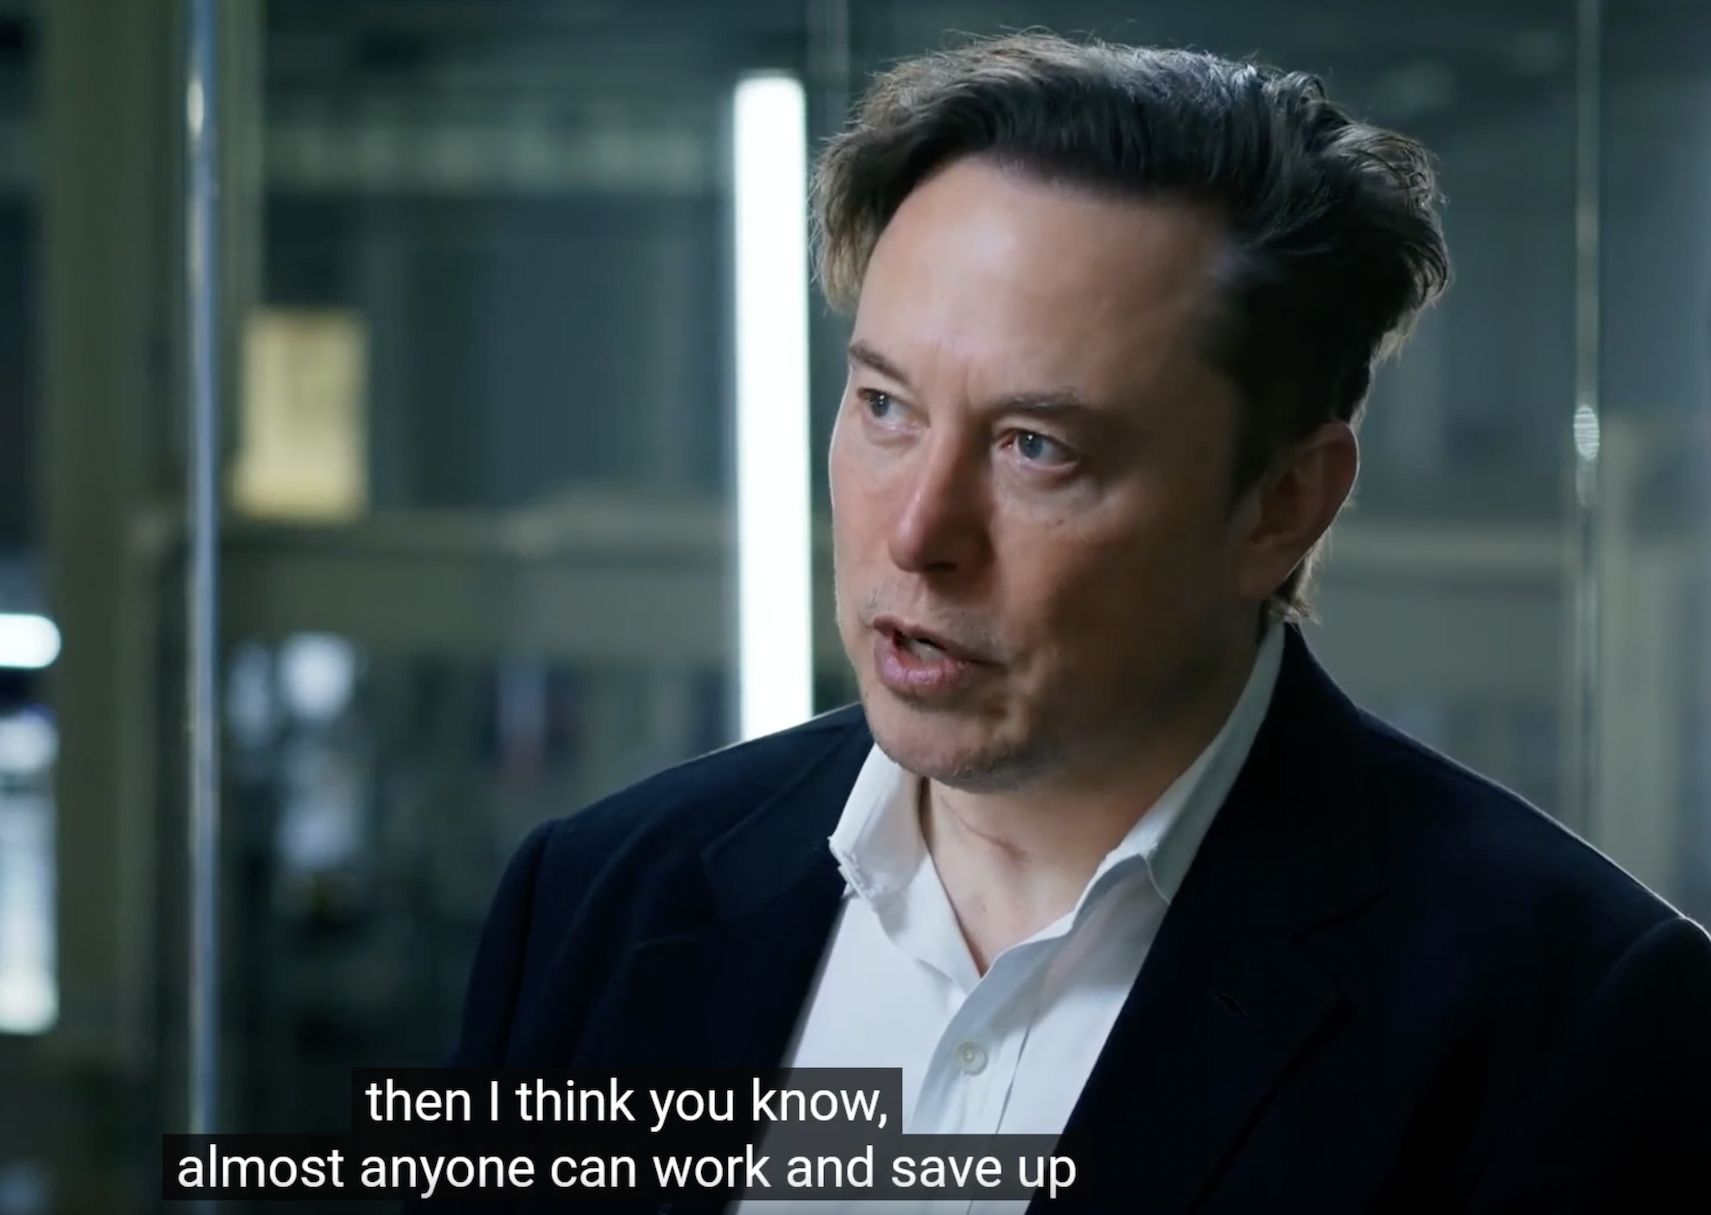 Elon Musk - then I think you know, almost anyone can work and save up